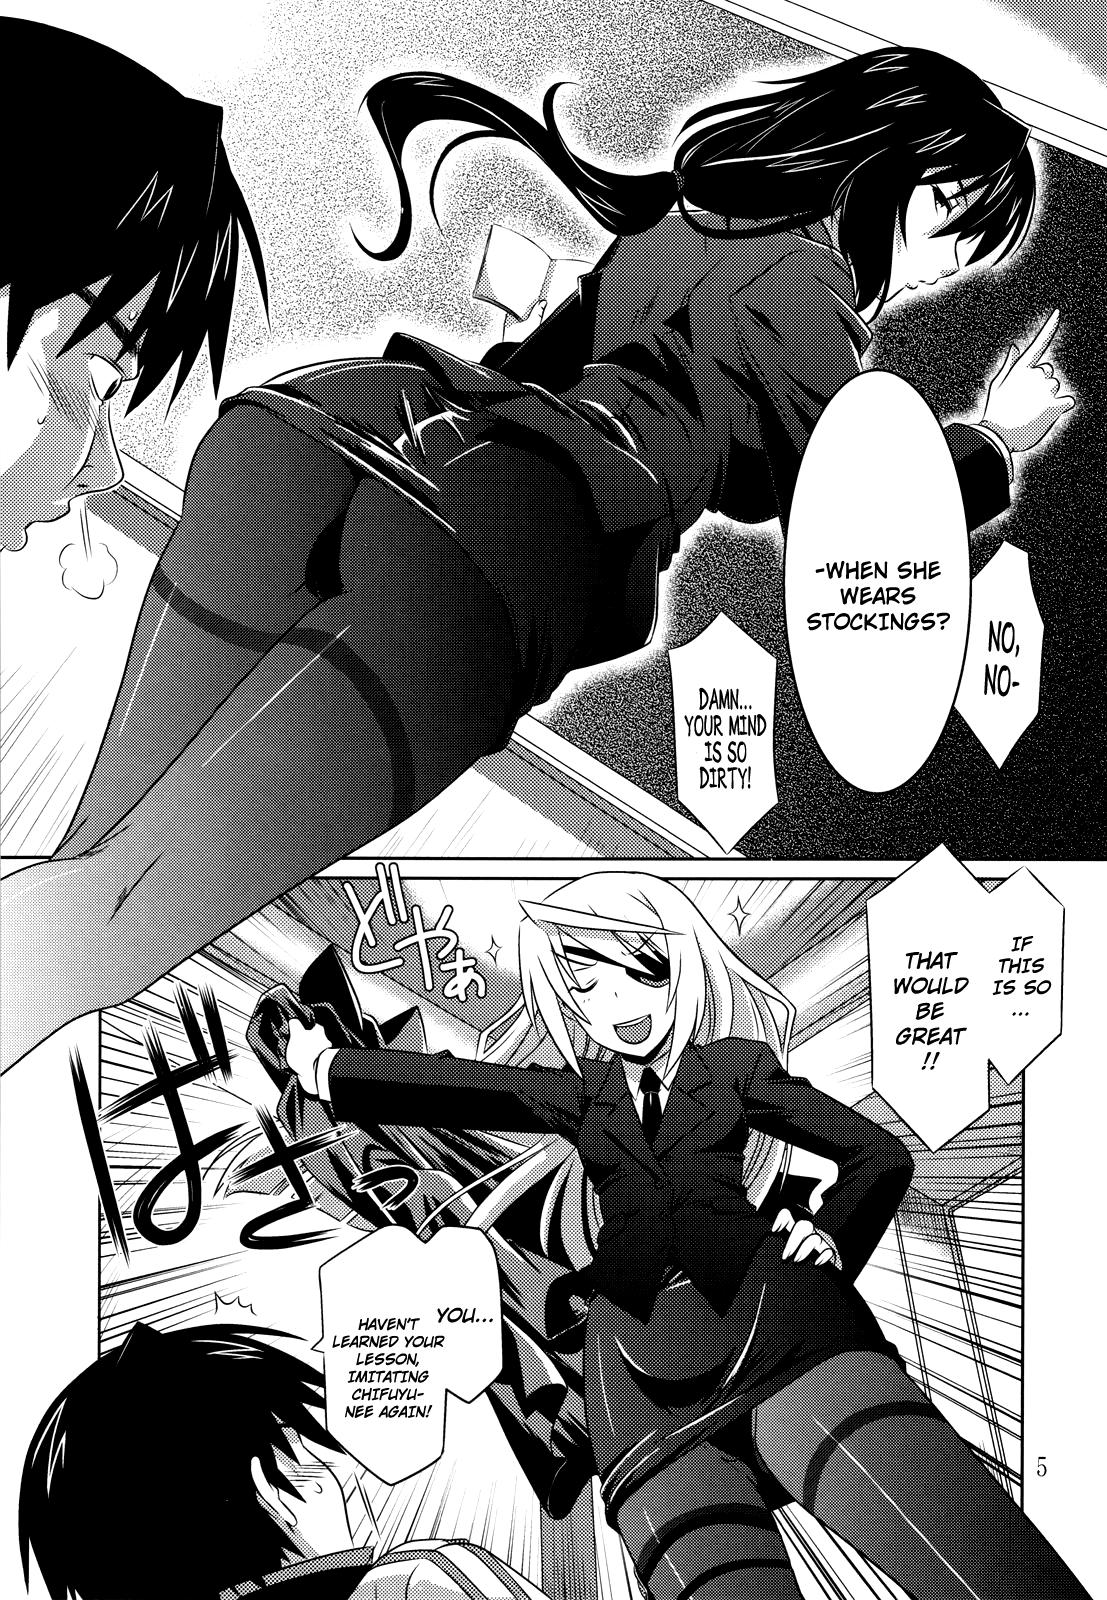 Chichona is Incest Strategy 2 - Infinite stratos Female Orgasm - Page 4